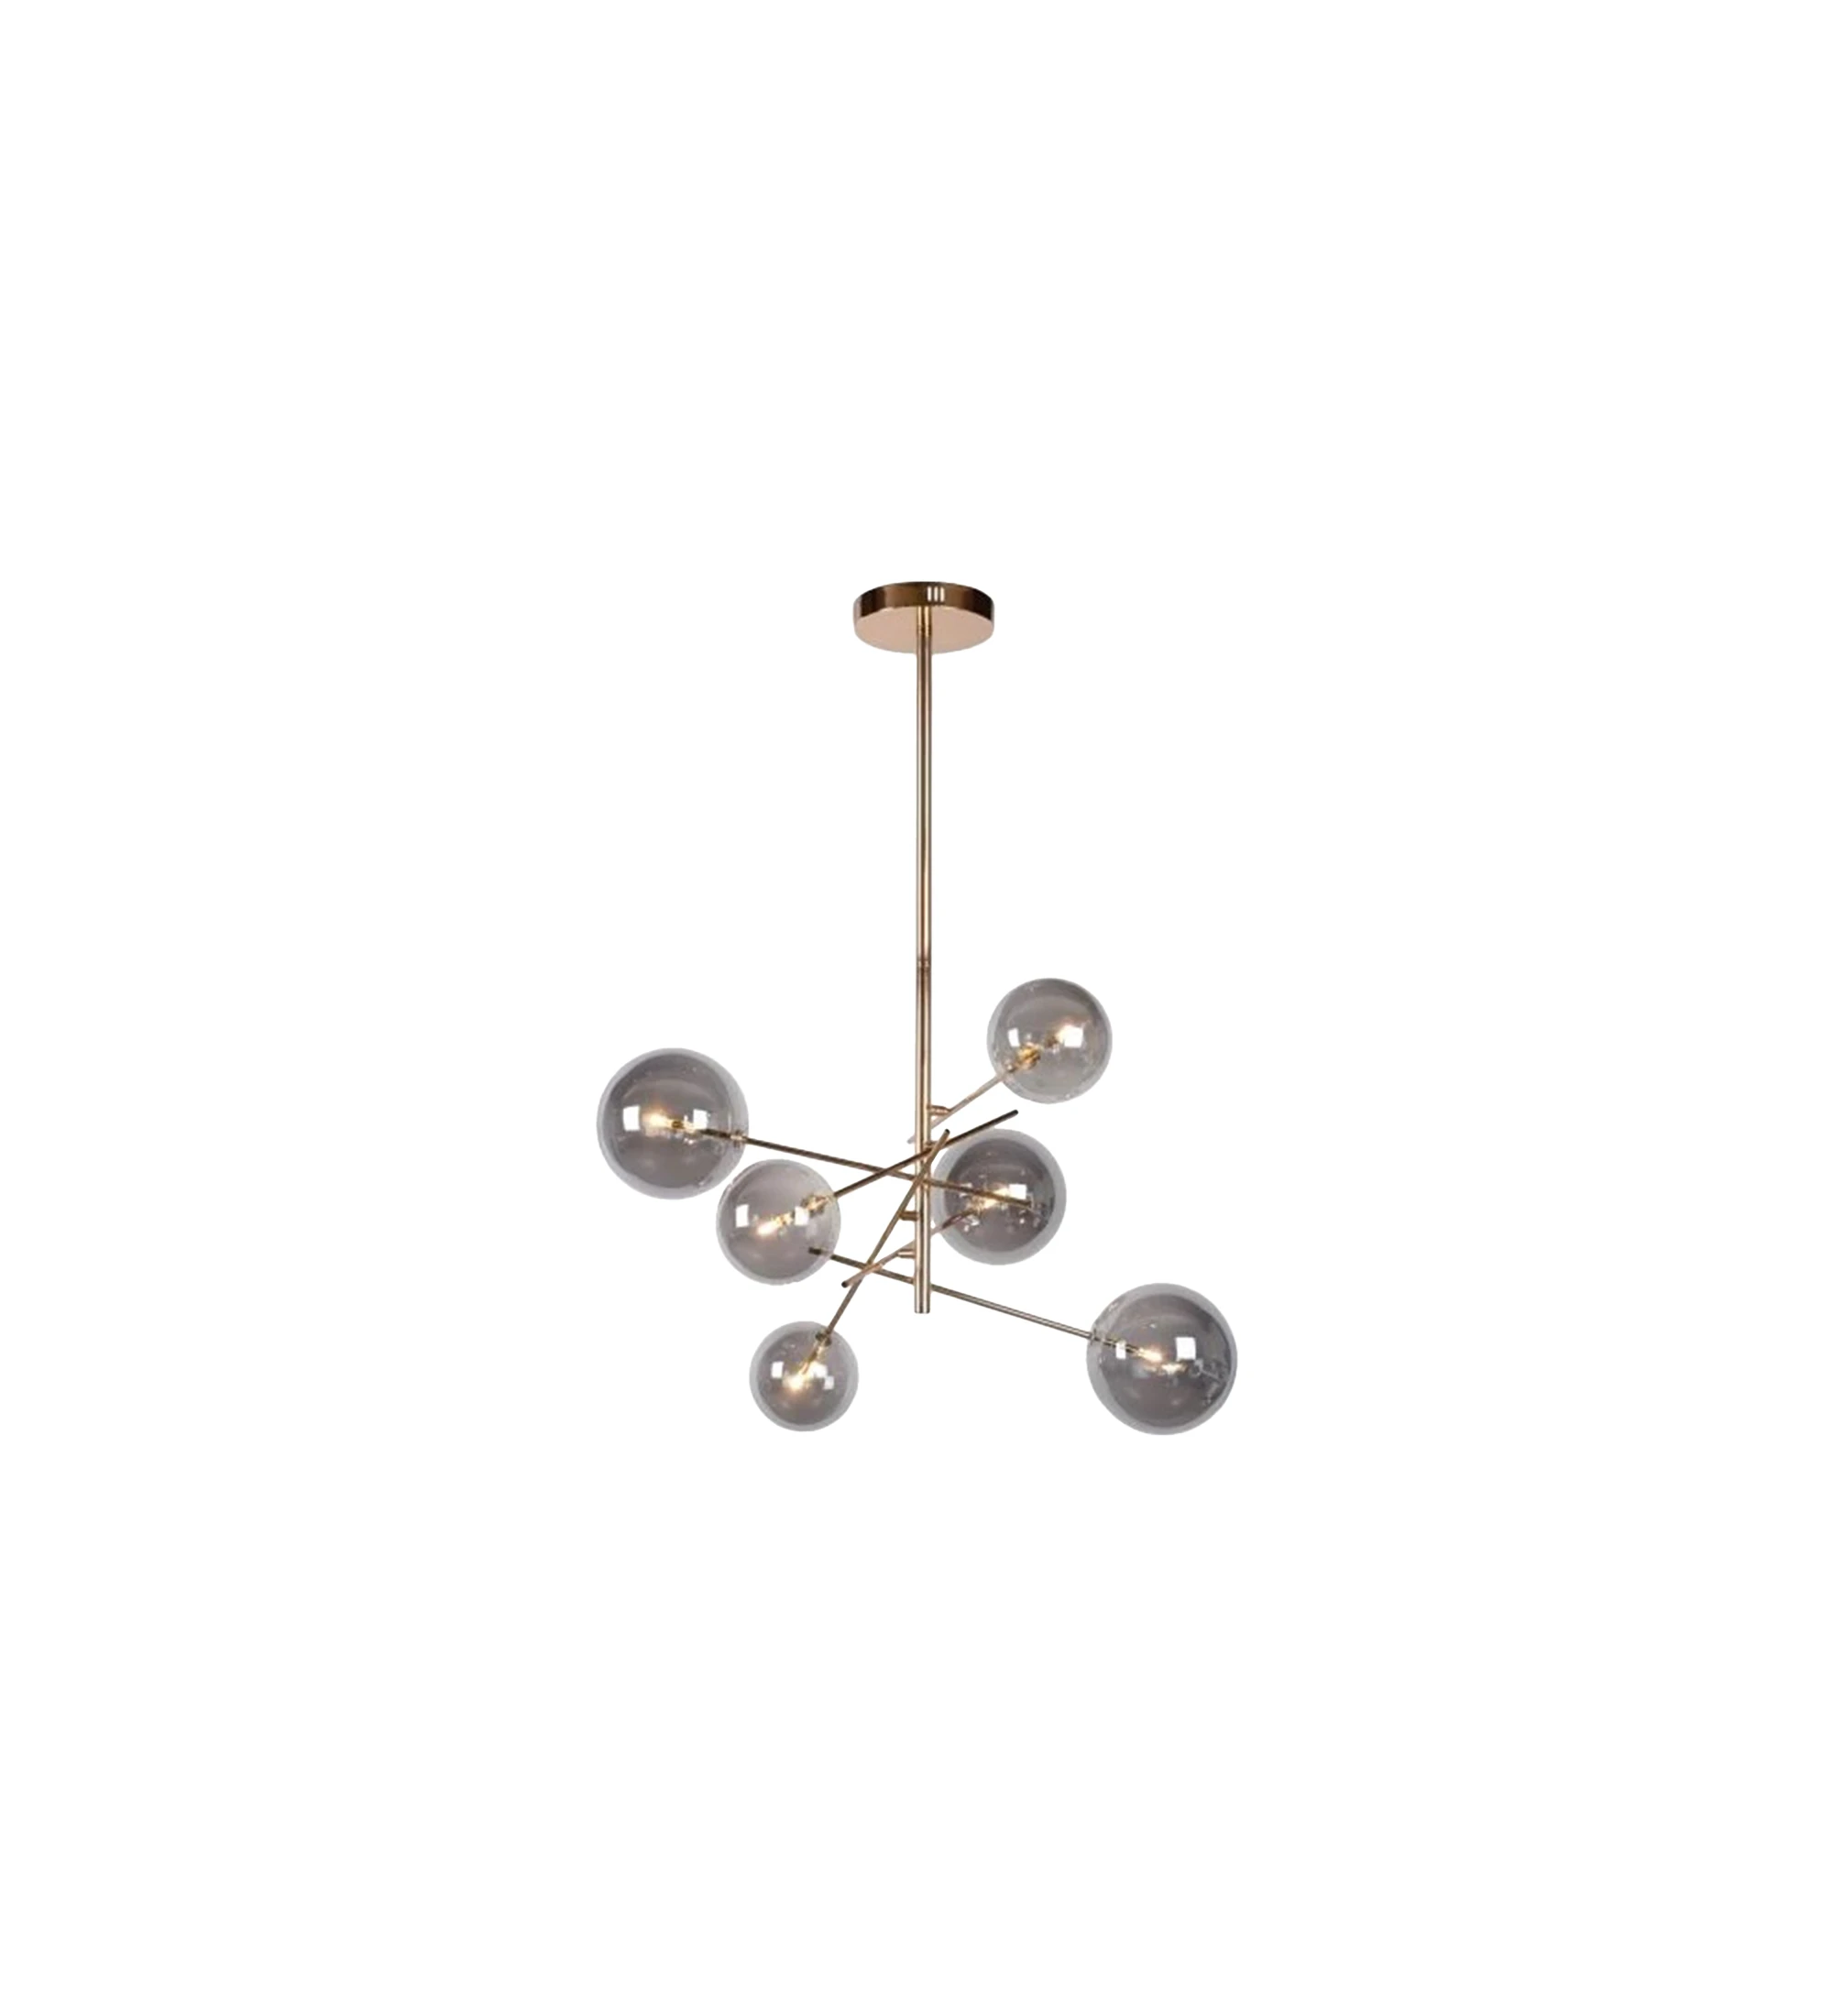 Pendant lamp in golden metal with smoky glass diffusers.